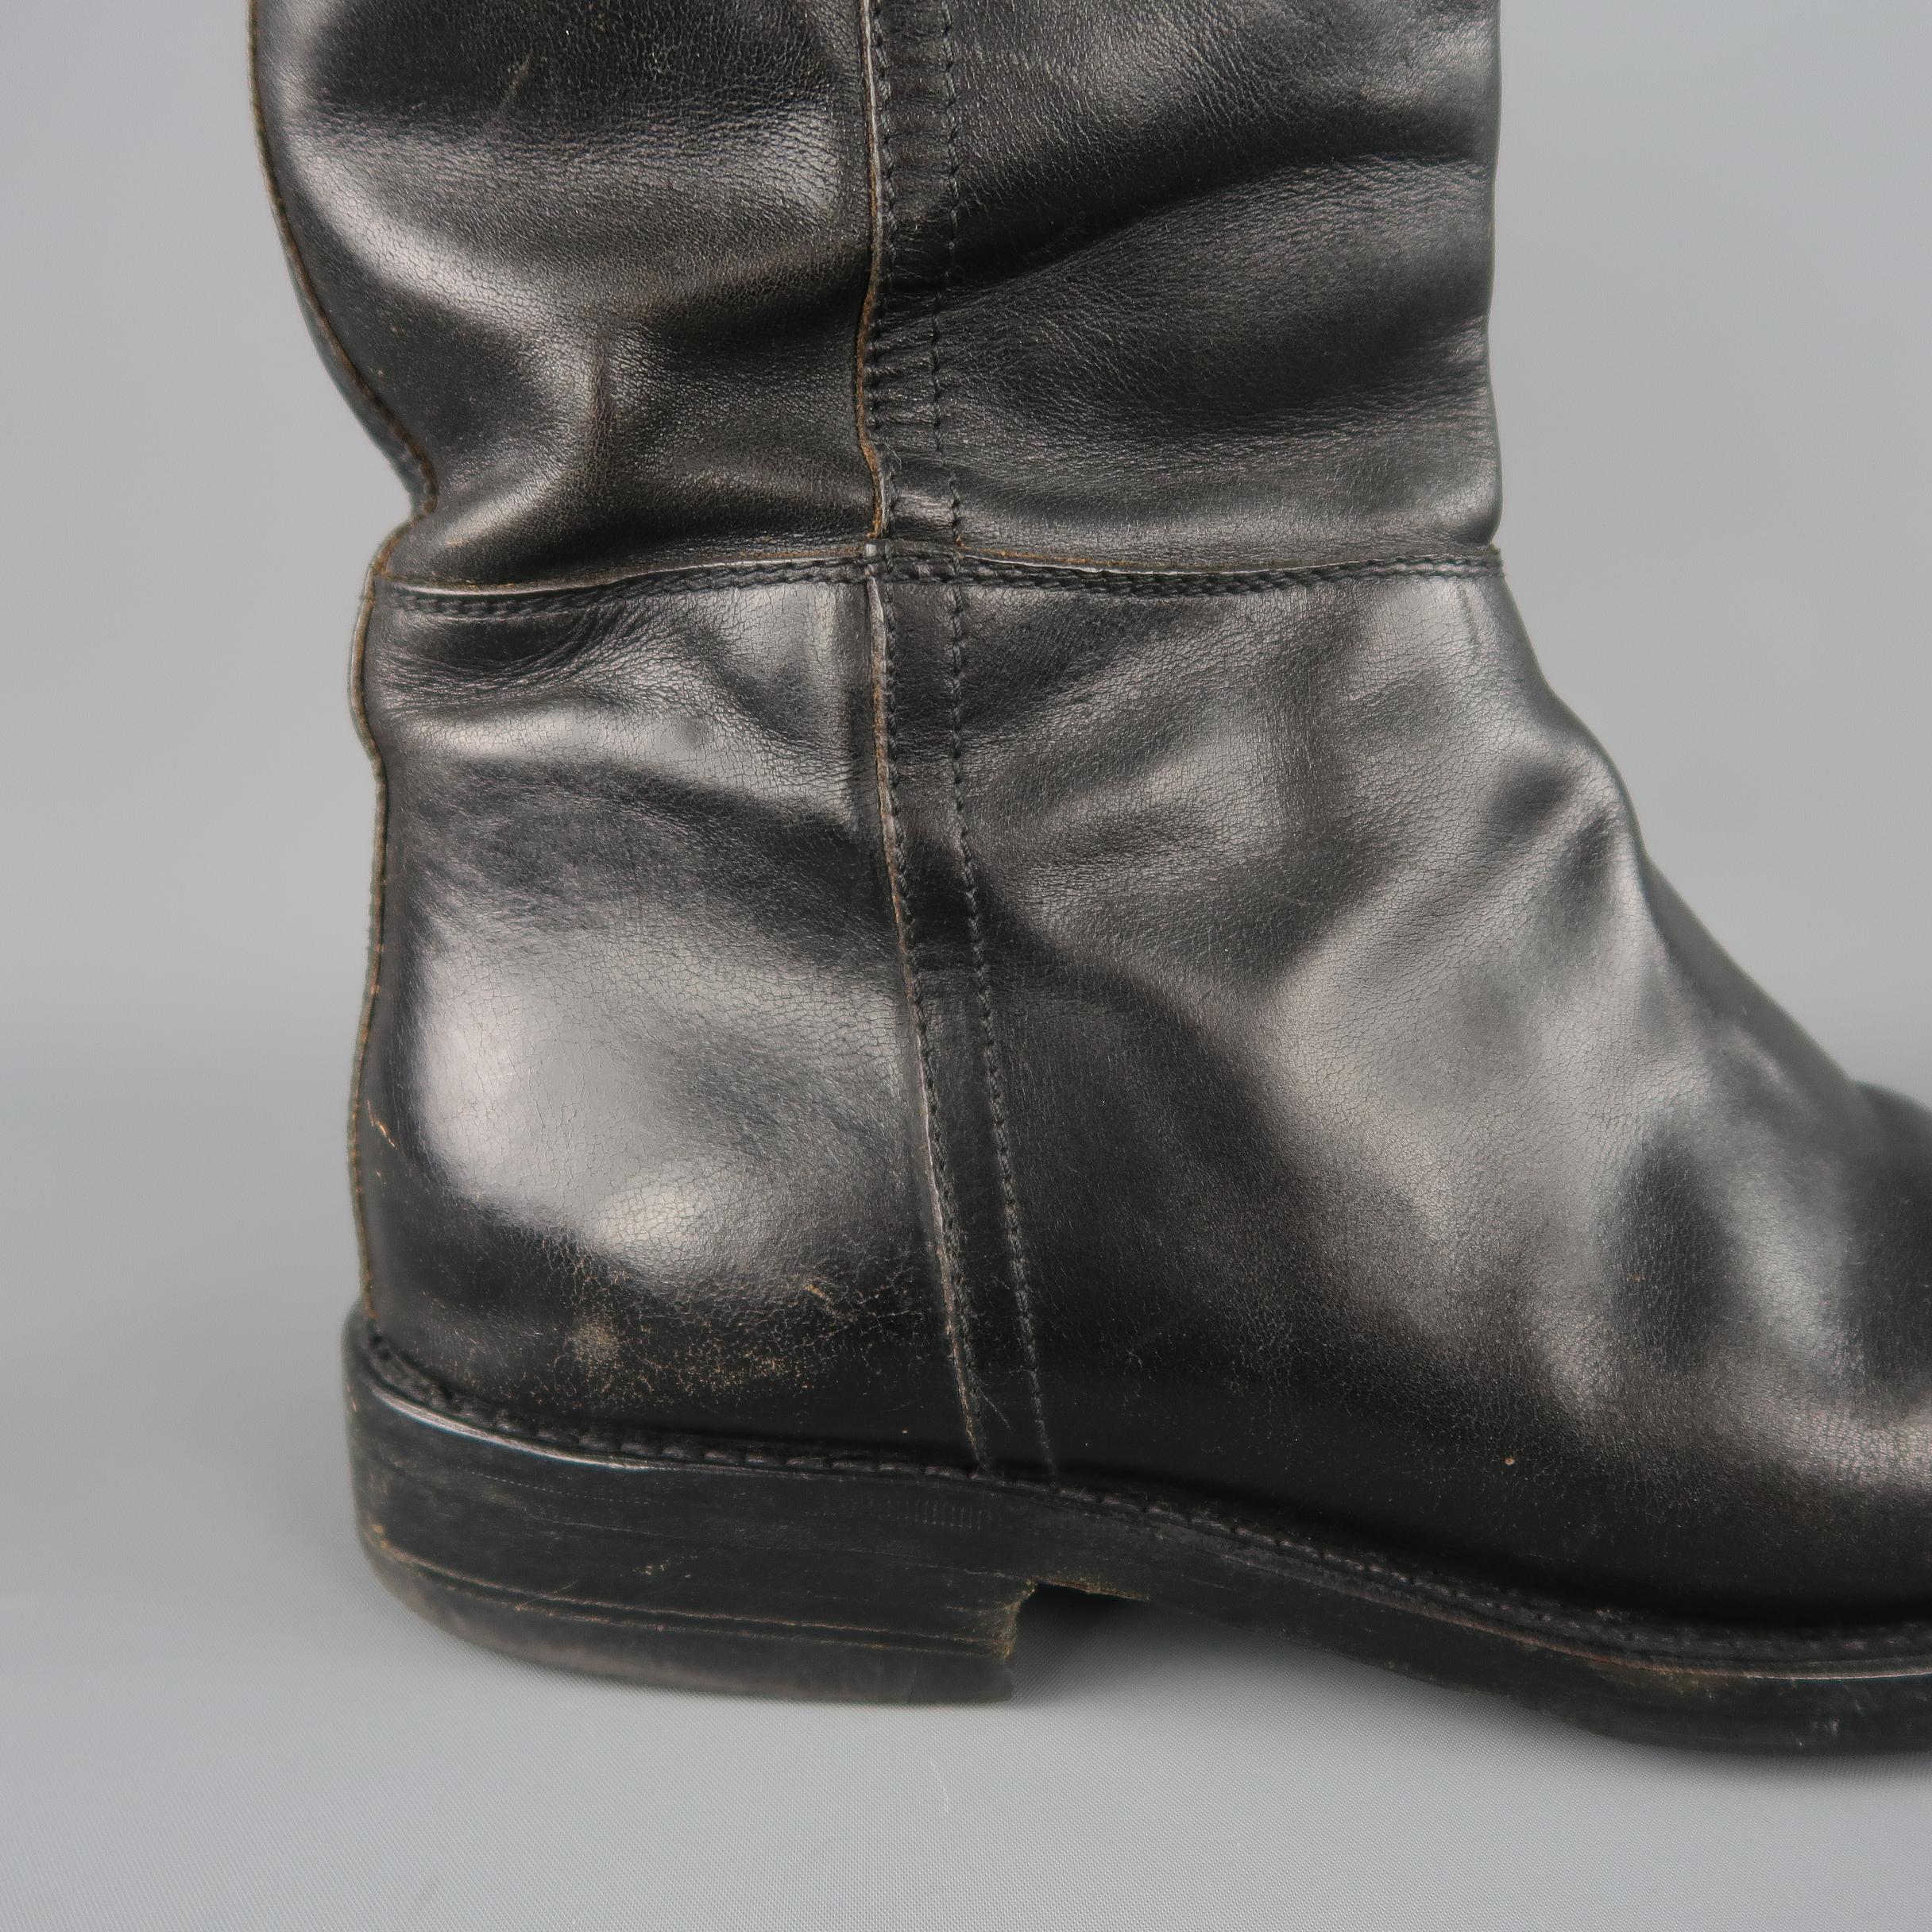 Yves Saint Laurent pull on biker boots come in black leather with a round toe and chunky, heeled sole. Wear throughout. Made in Italy.
 
Fair Pre-Owned Condition.
Marked: IT 42.5
 
Measurements:
 
Length: 10.5 in.